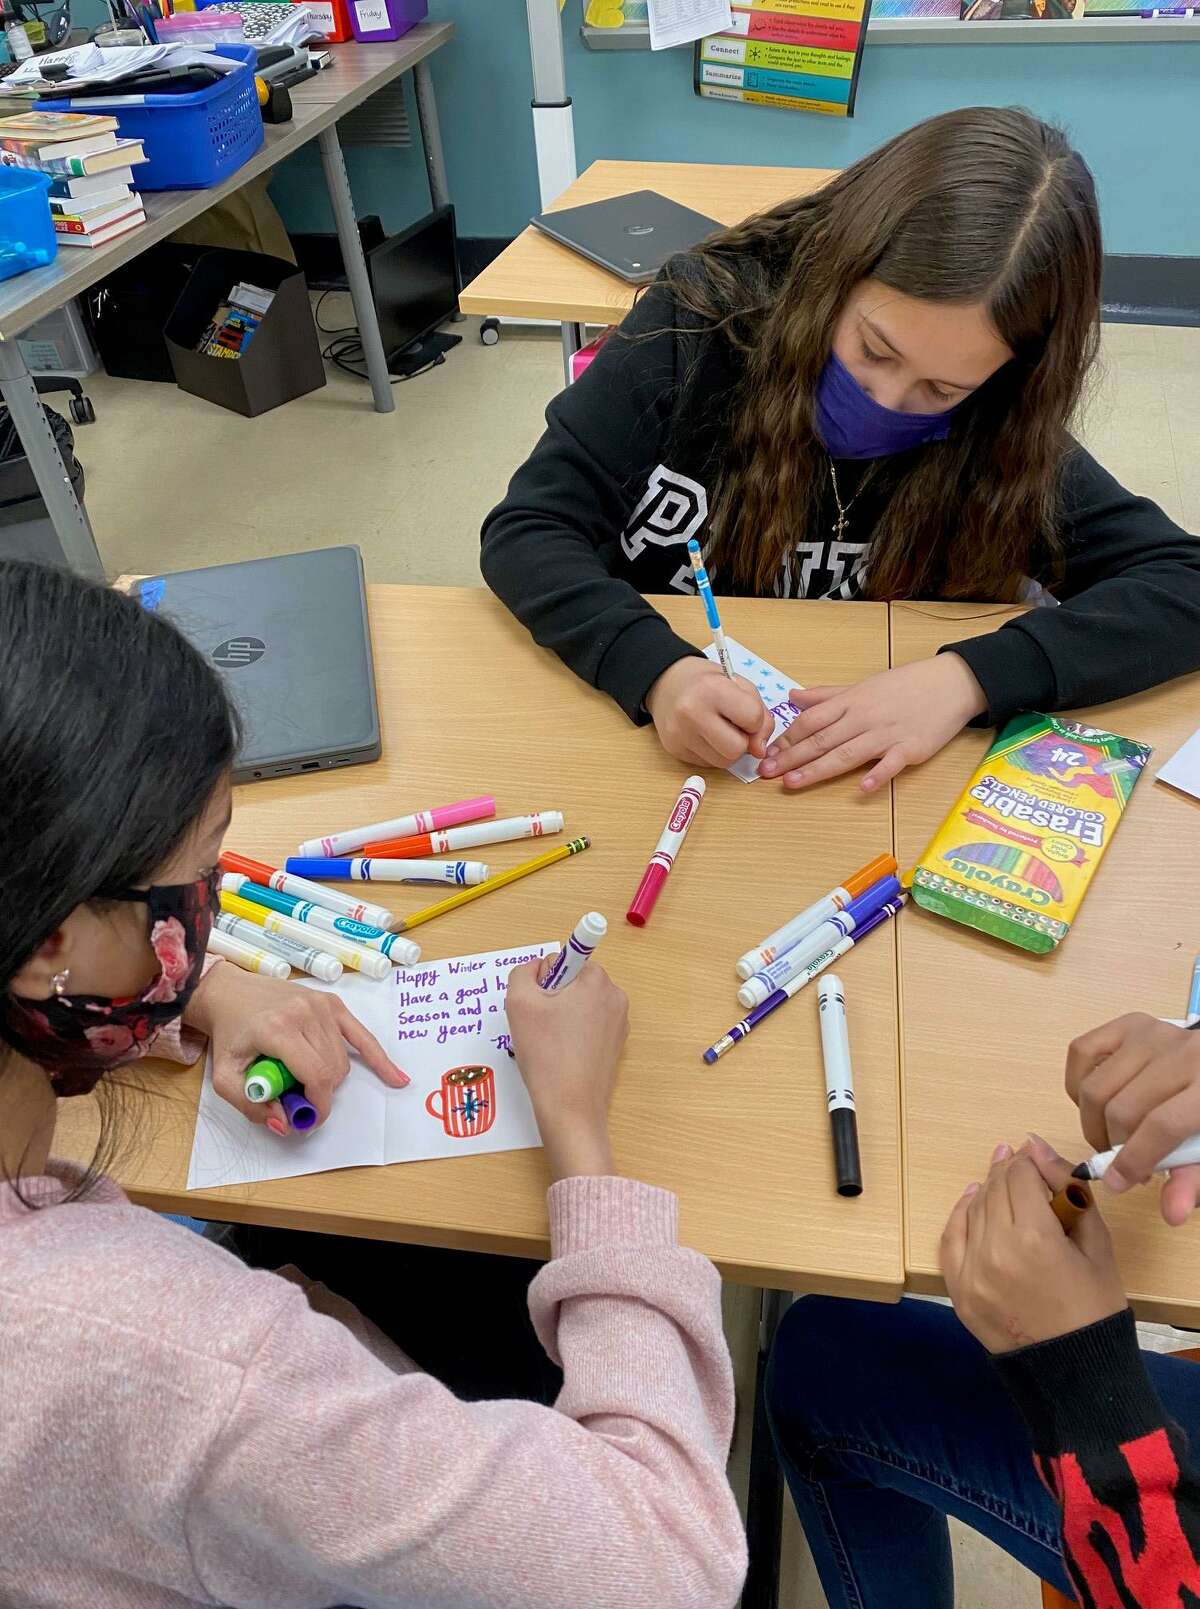 Strawberry Hill students (left to right) Rhea Sadhu and Bella Montagna create holiday cards to go into gift bags for Stamford seniors as part of SilverSource’s “Caring Connections” program.